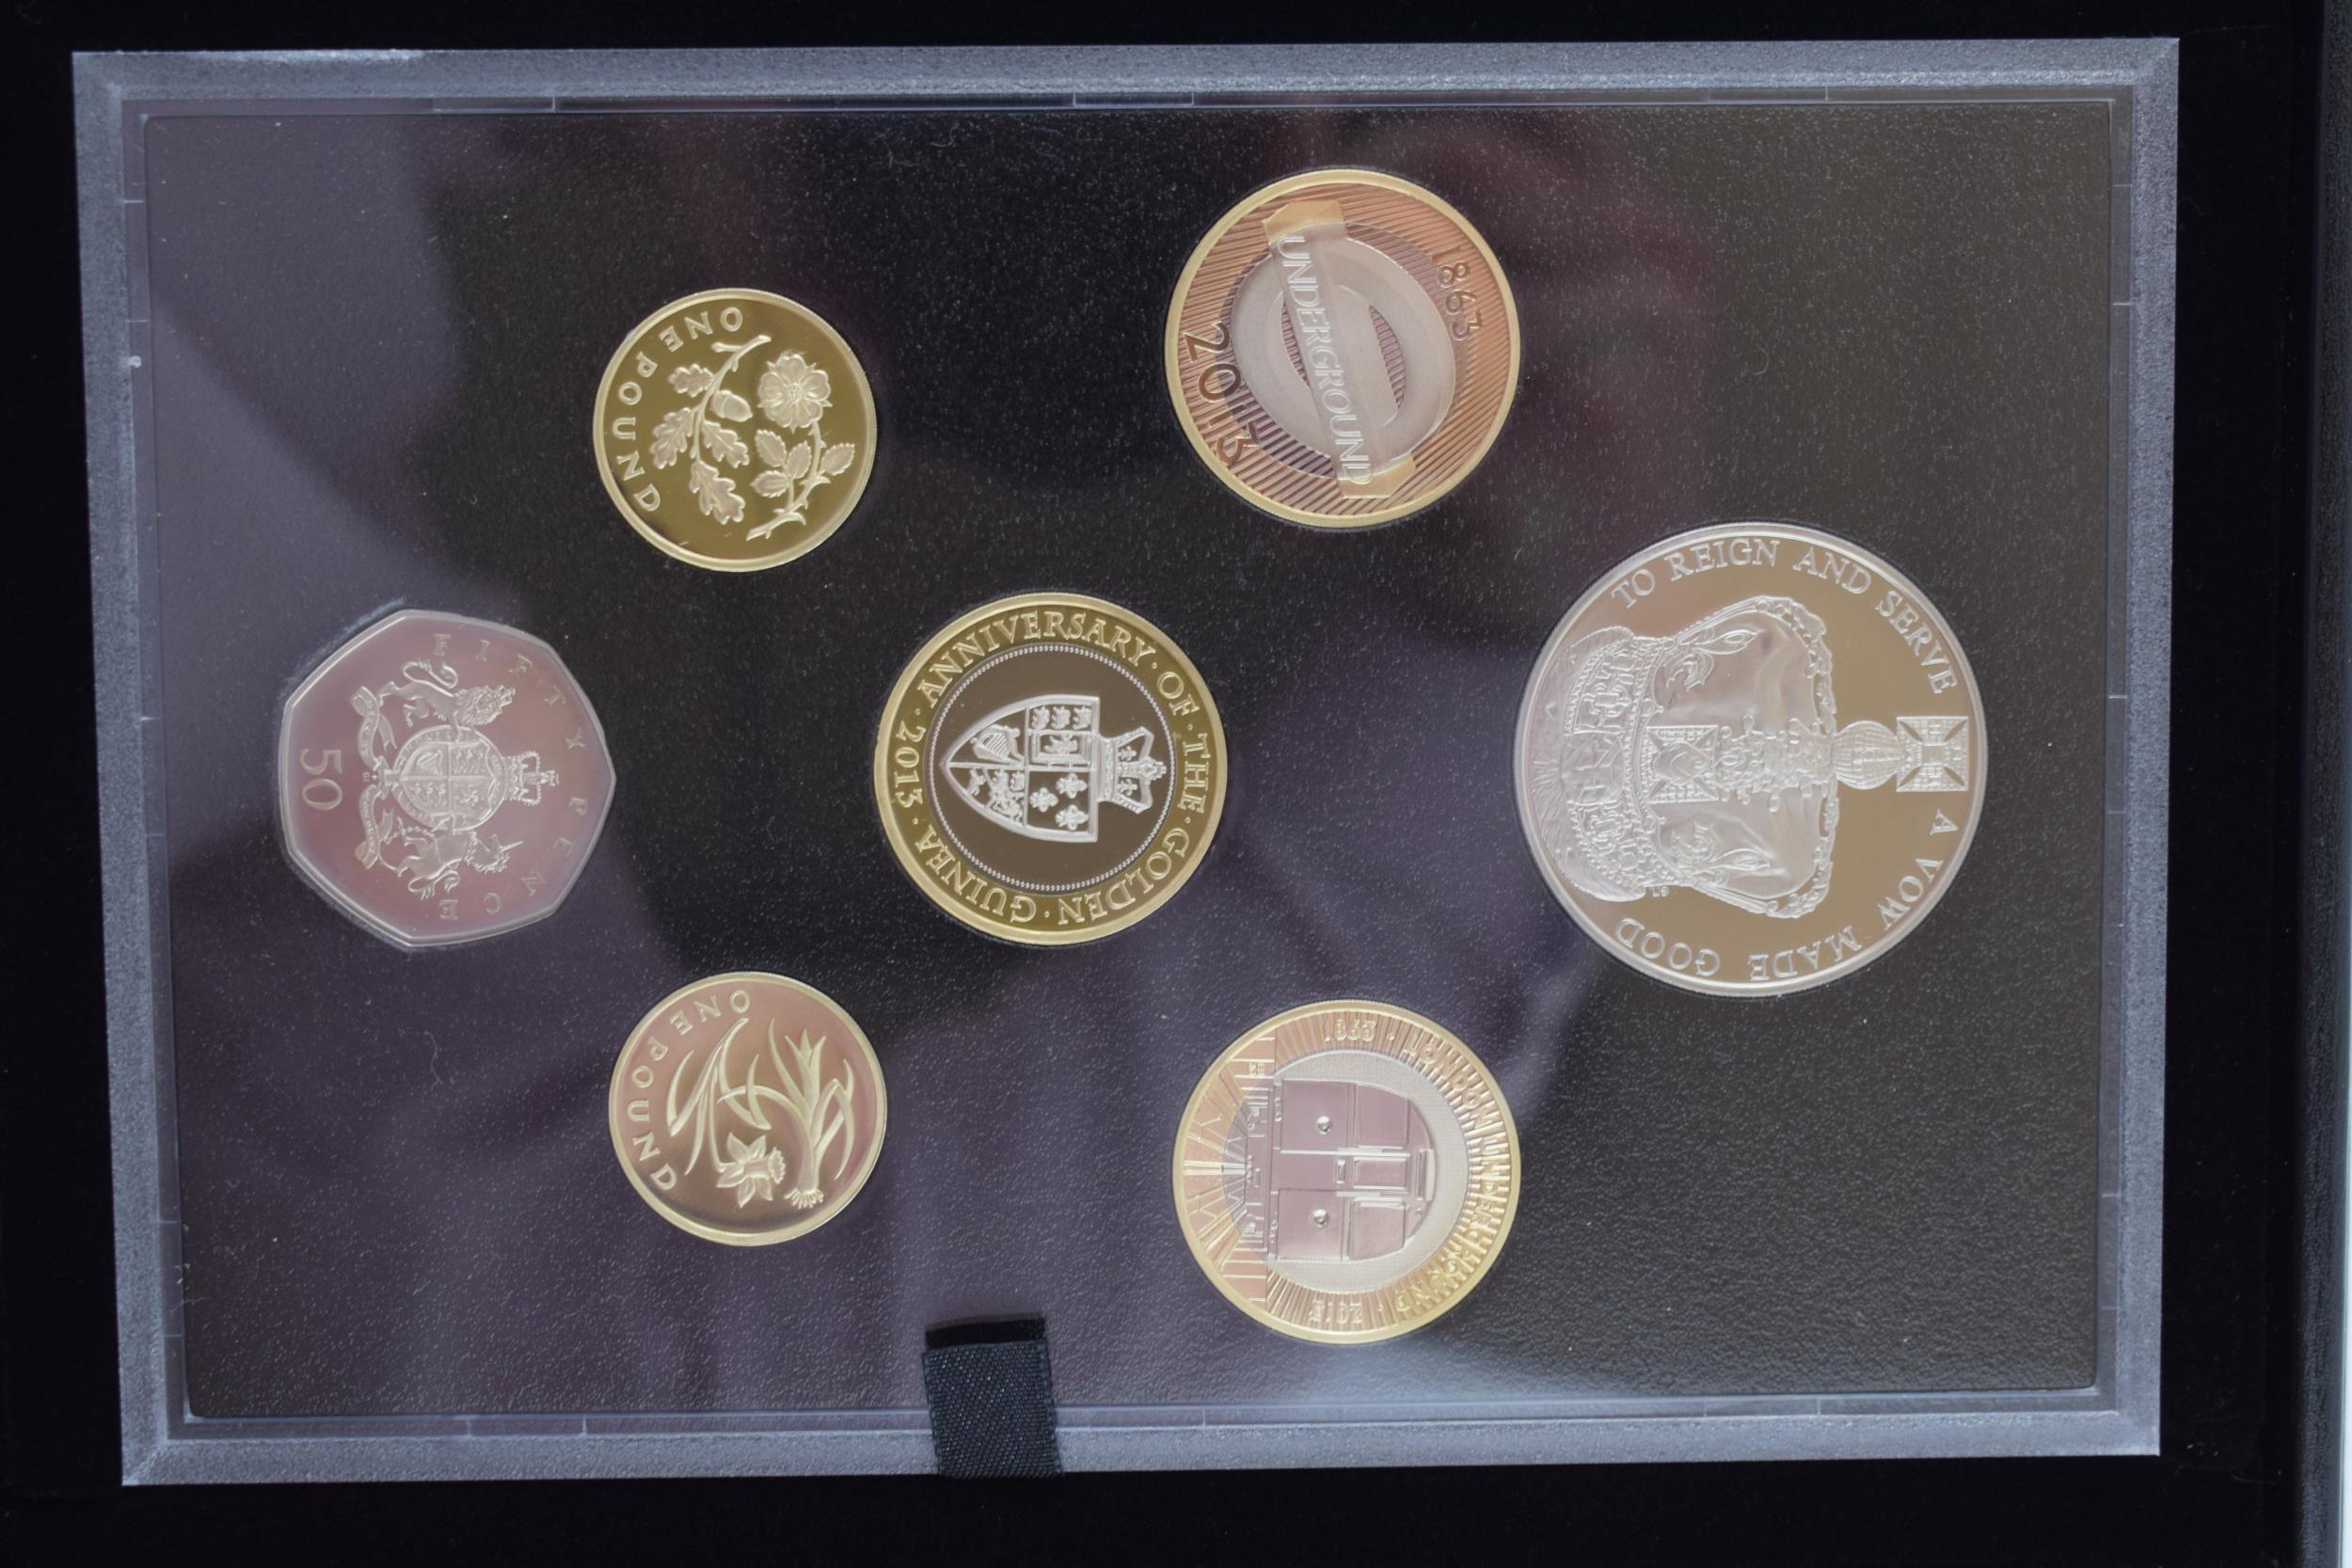 Royal Mint The 2013 United Kingdom Proof Coin Set Commemorative Edition, boxed with certificate, - Image 2 of 2